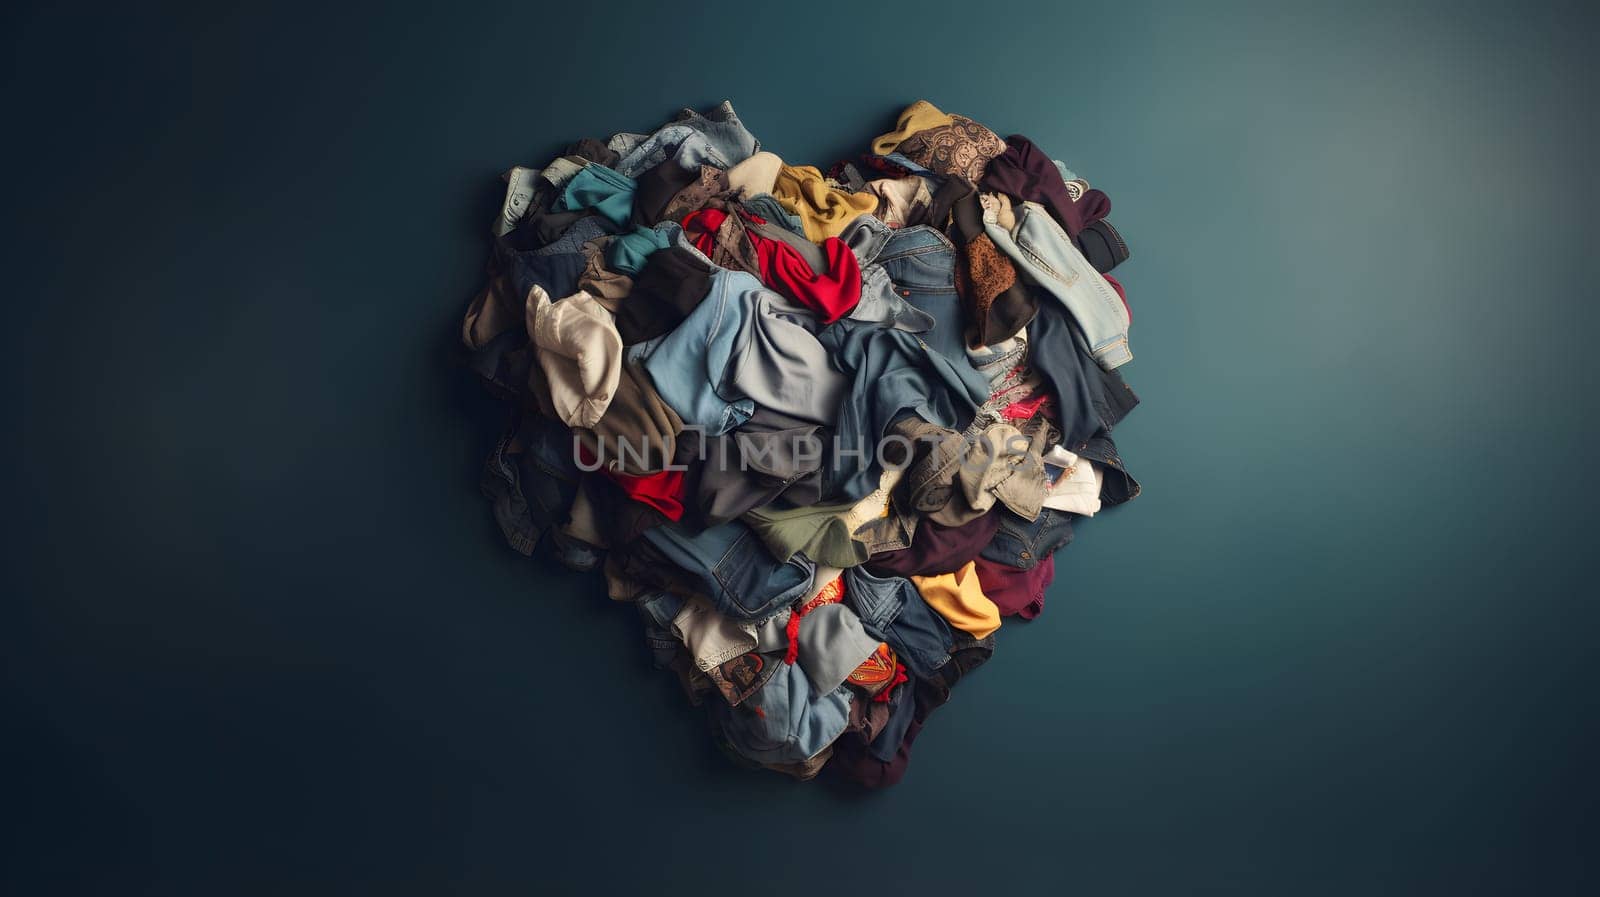 used clothes folded to form a heart on grey background. Neural network generated in May 2023. Not based on any actual person, scene or pattern.